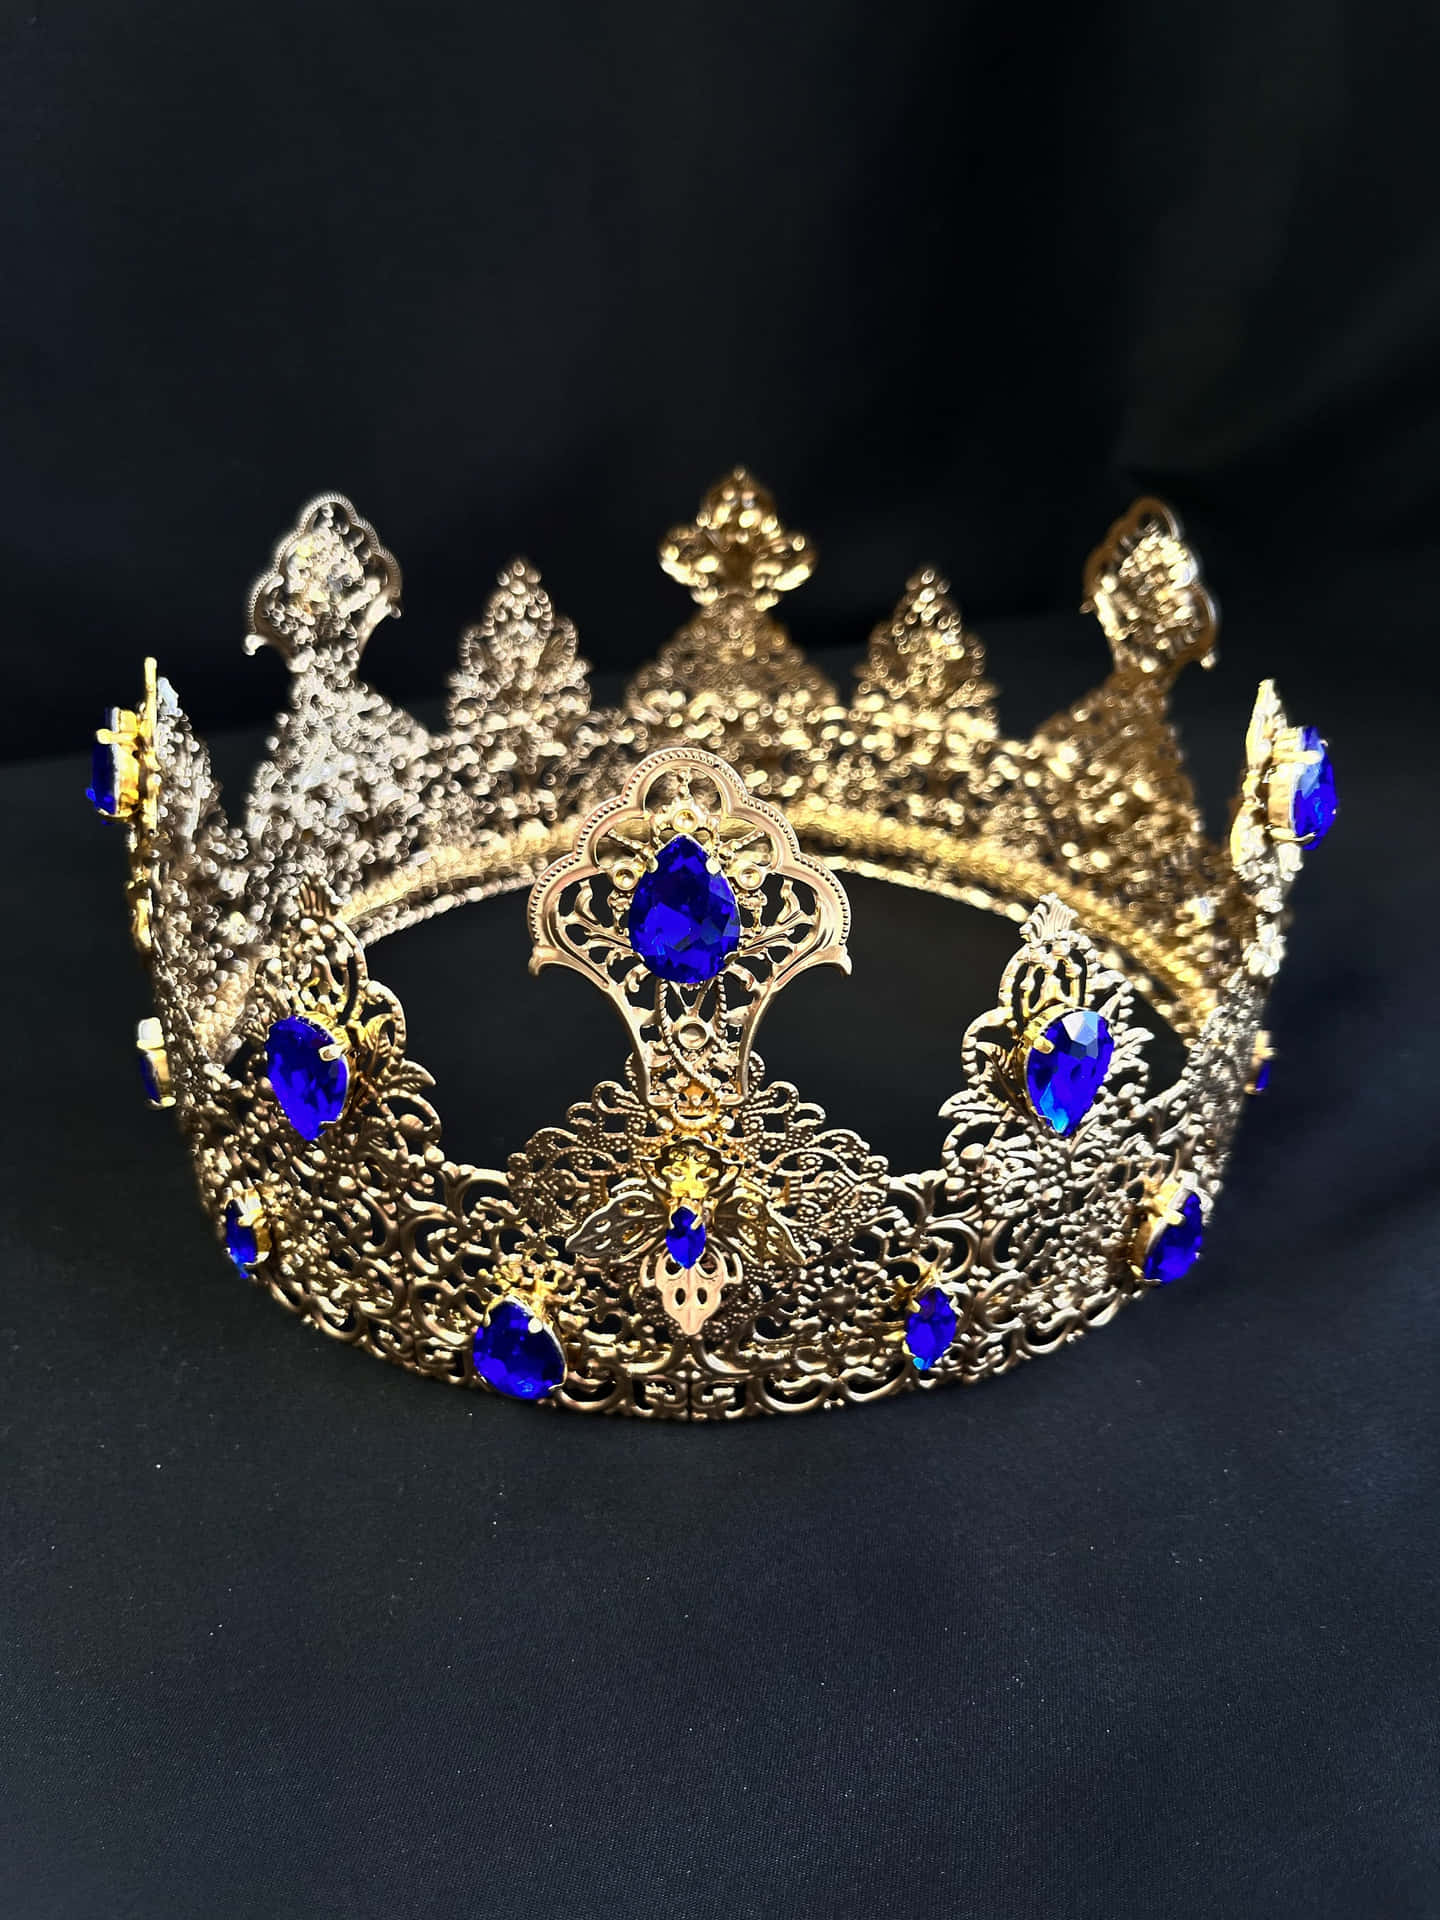 A shining gold crown, a symbol of grandeur and luxury